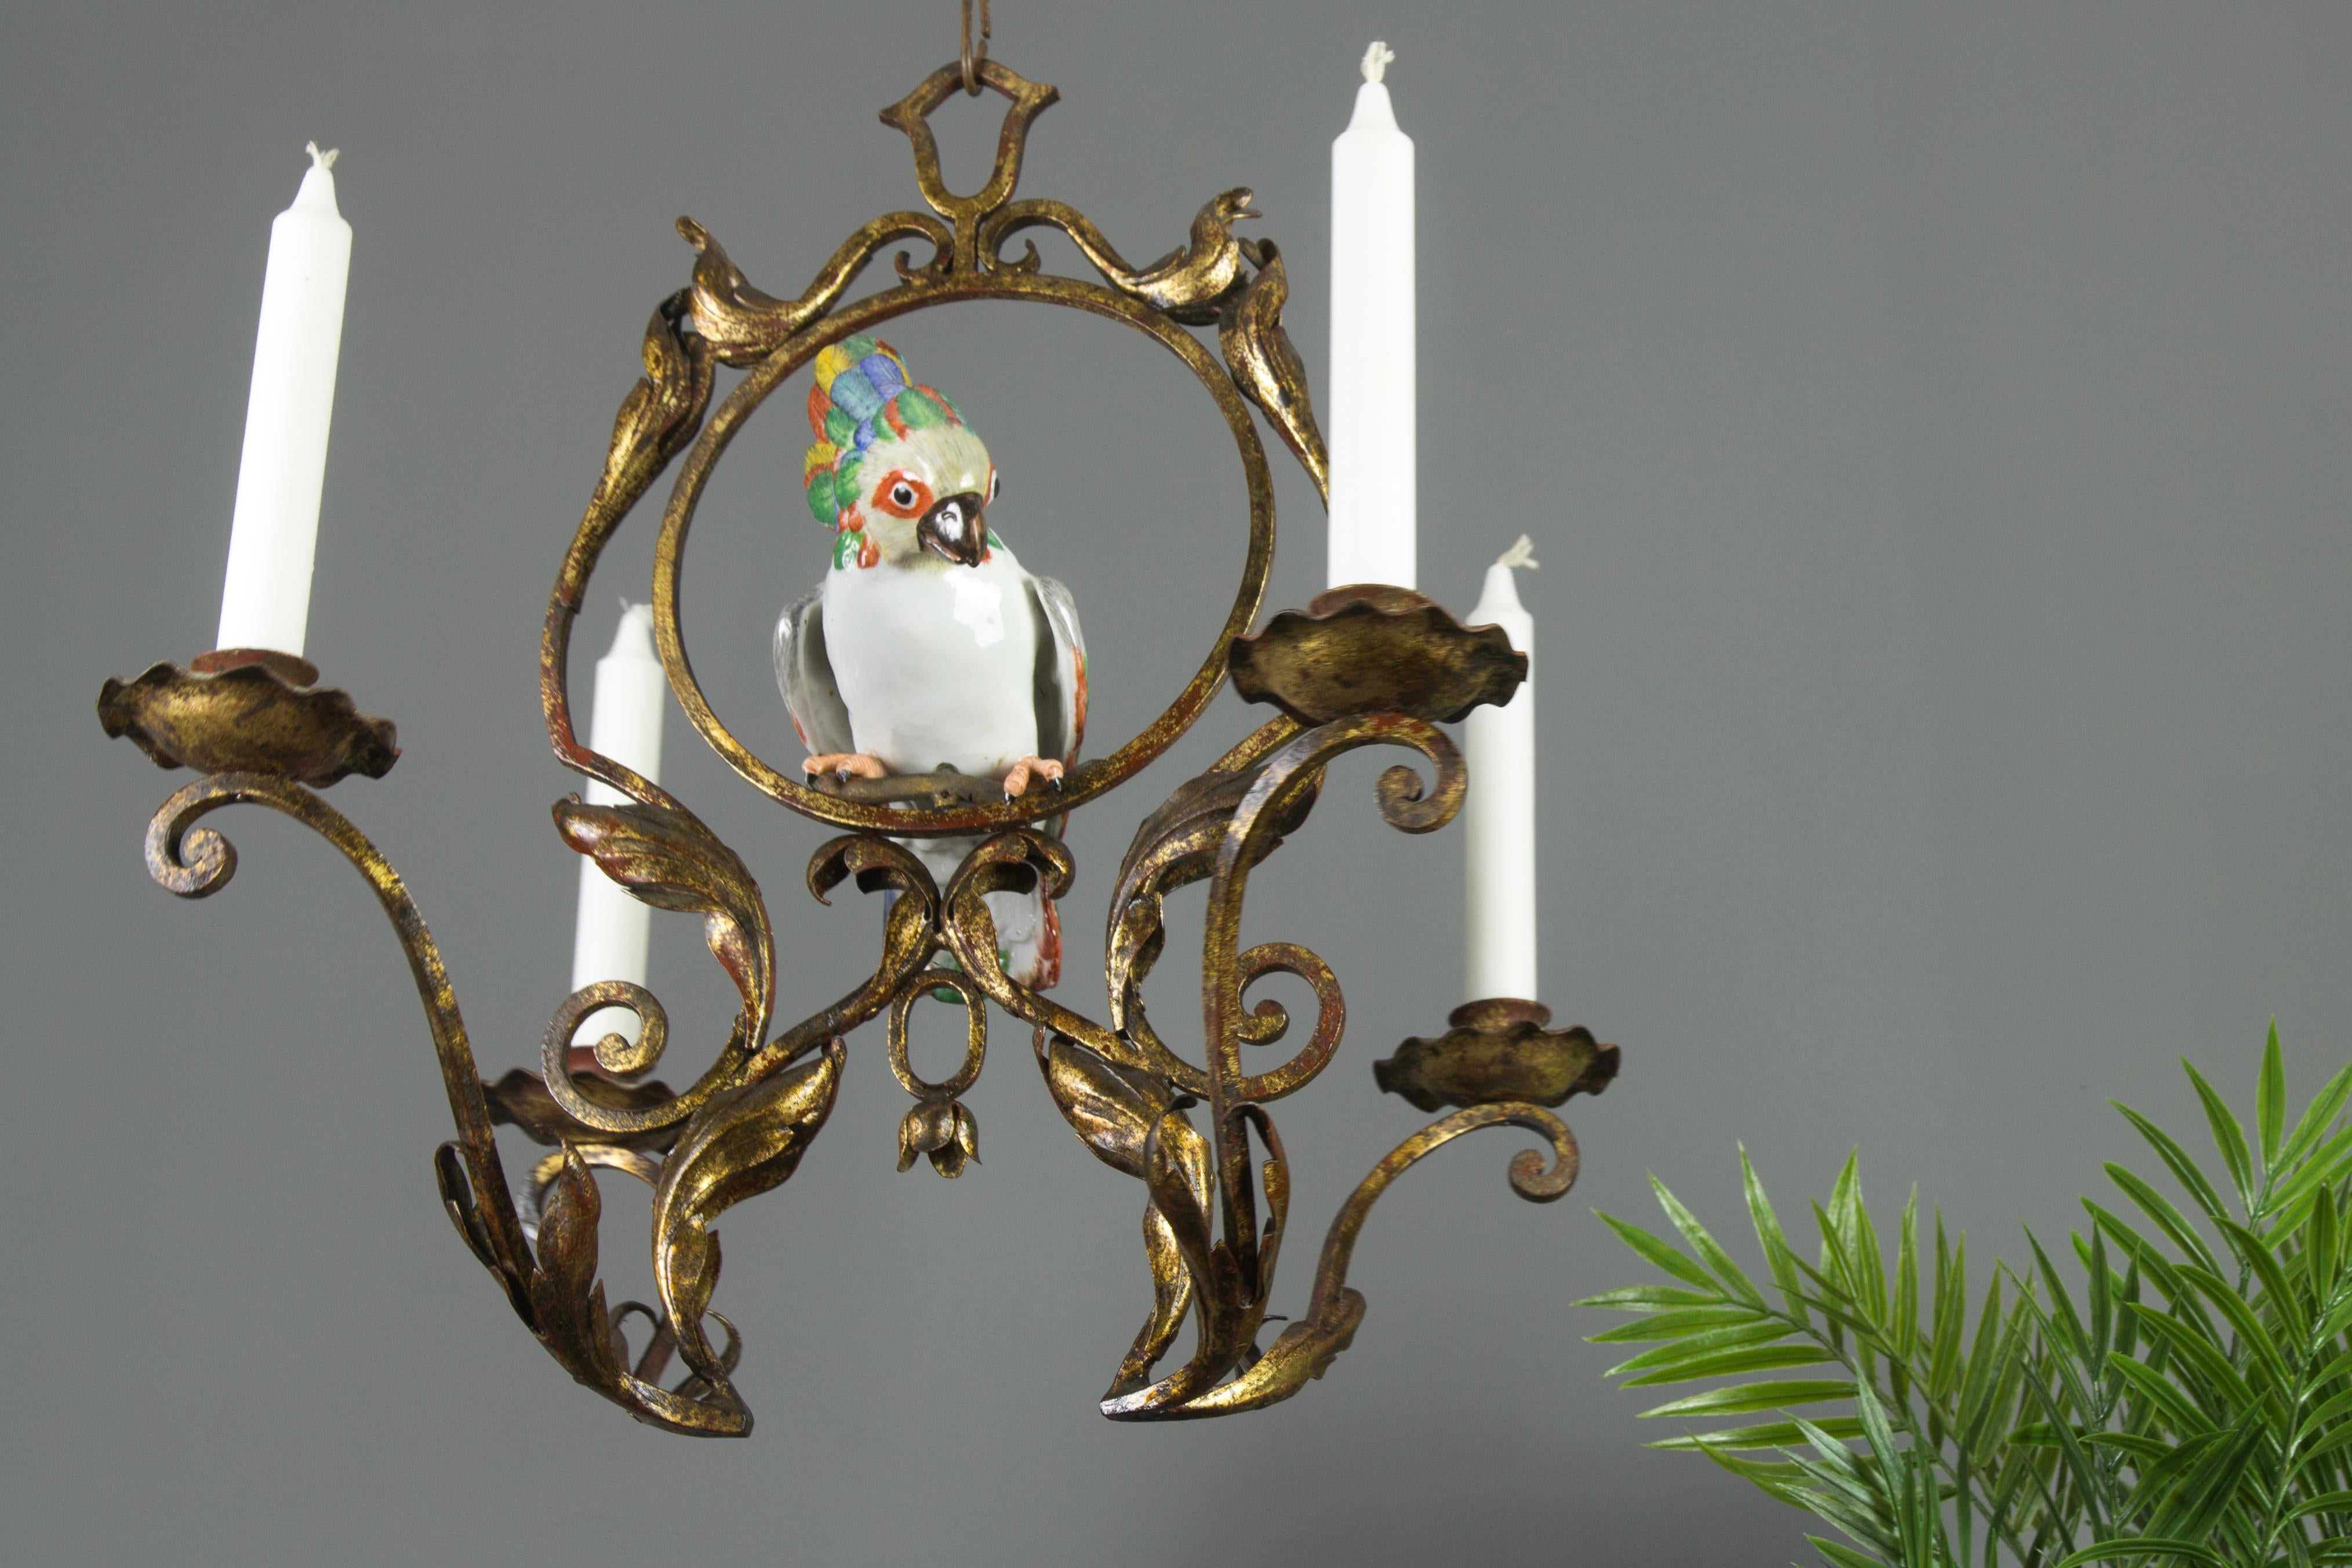 French Art Nouveau Wrought Iron and Porcelain Parrot Figurine Candle Chandelier 1